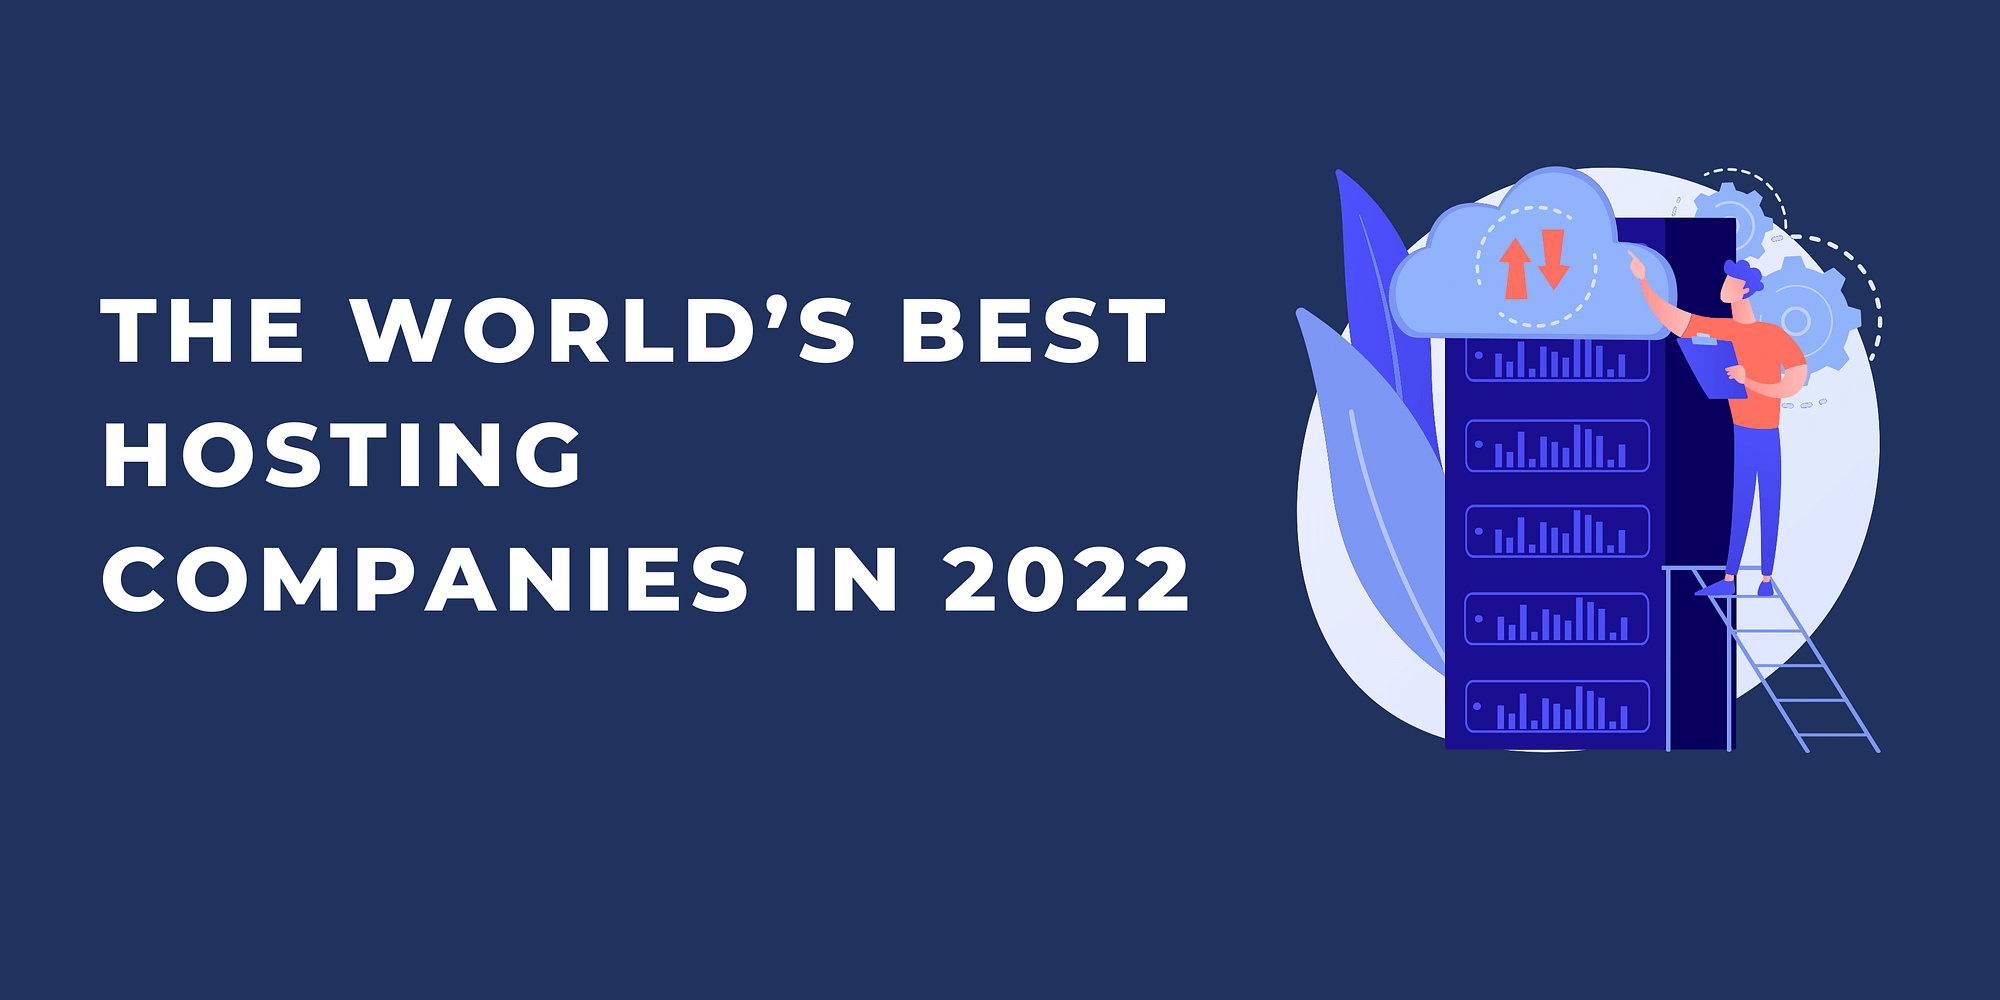 The World’s Best Hosting Companies In 2022